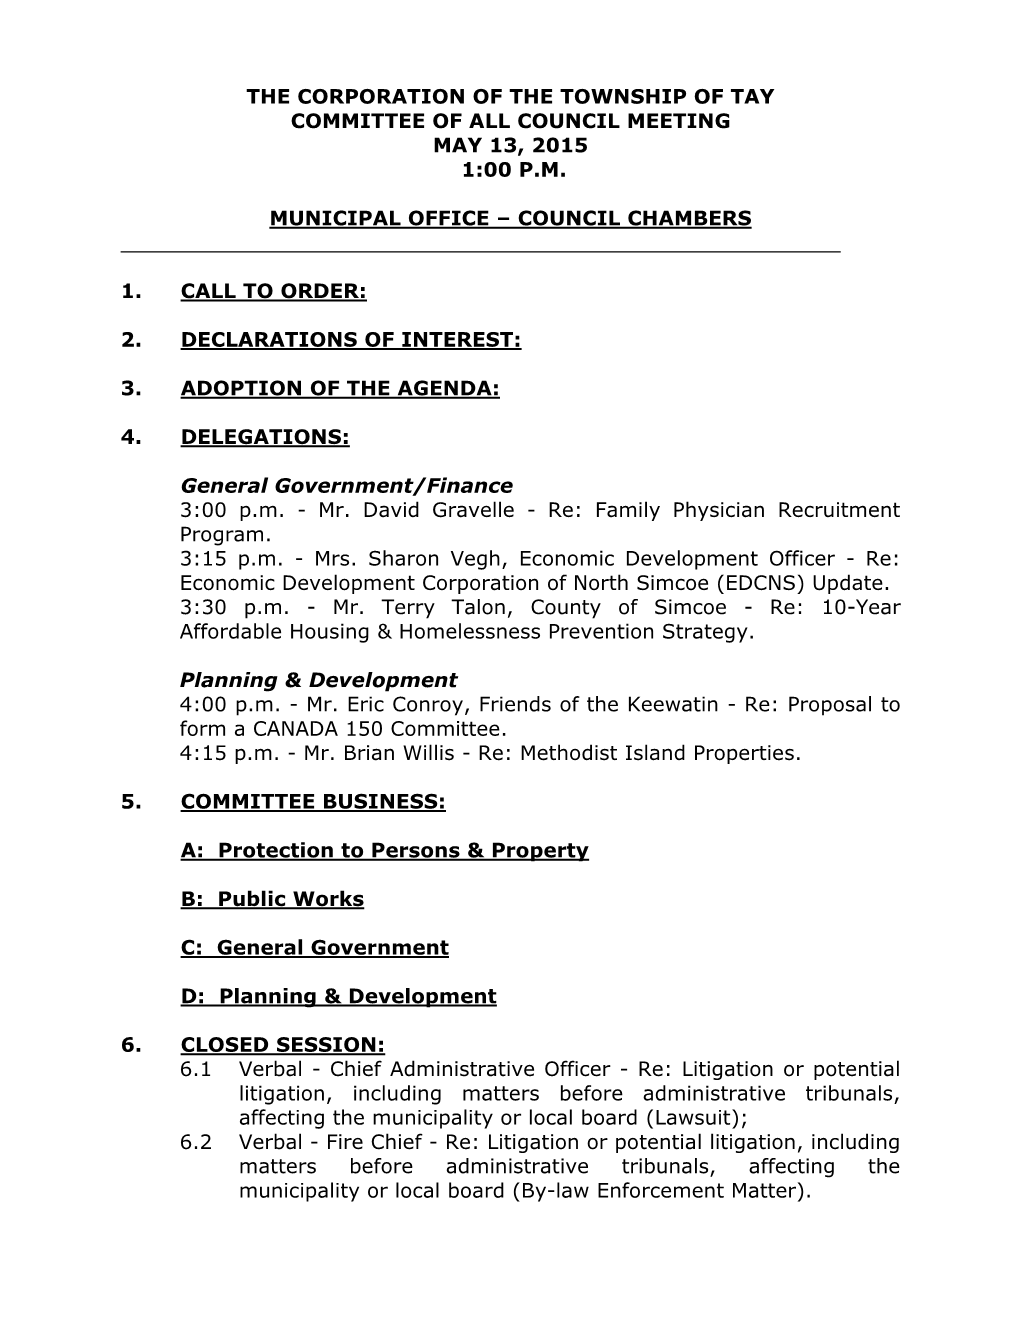 The Corporation of the Township of Tay Committee of All Council Meeting May 13, 2015 1:00 P.M